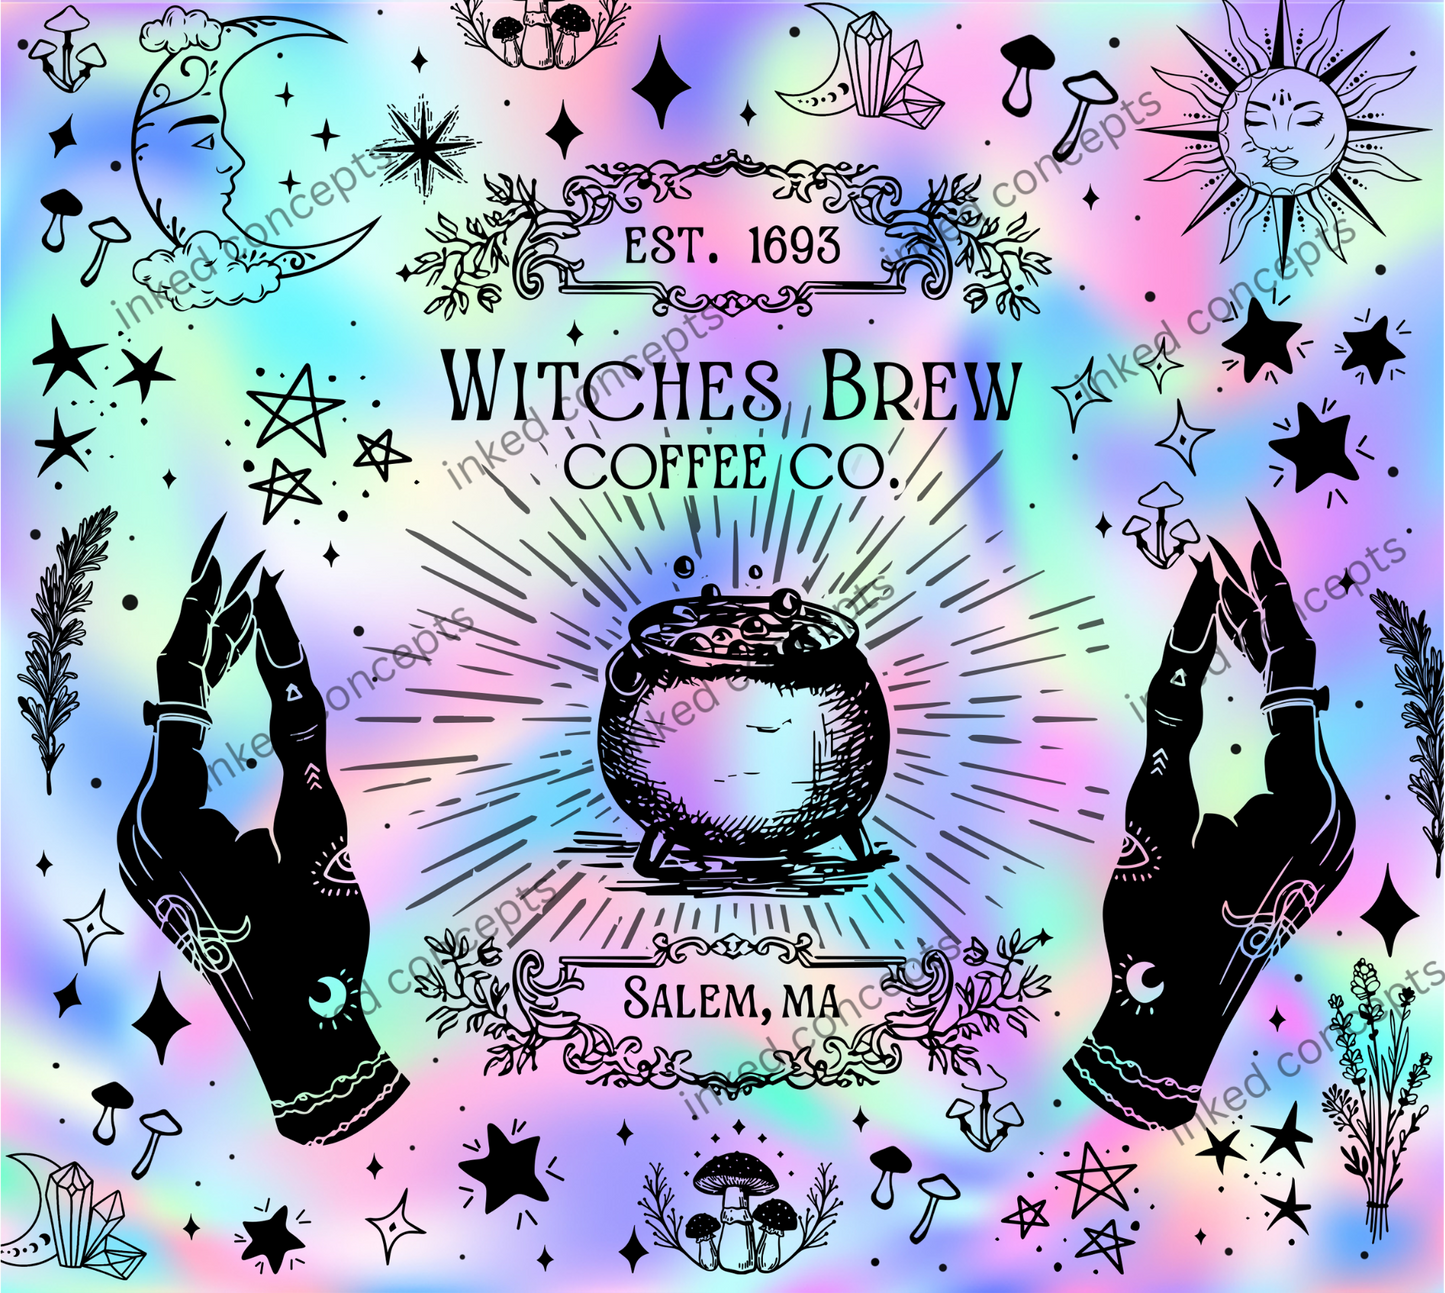 Witches Brew Coffee